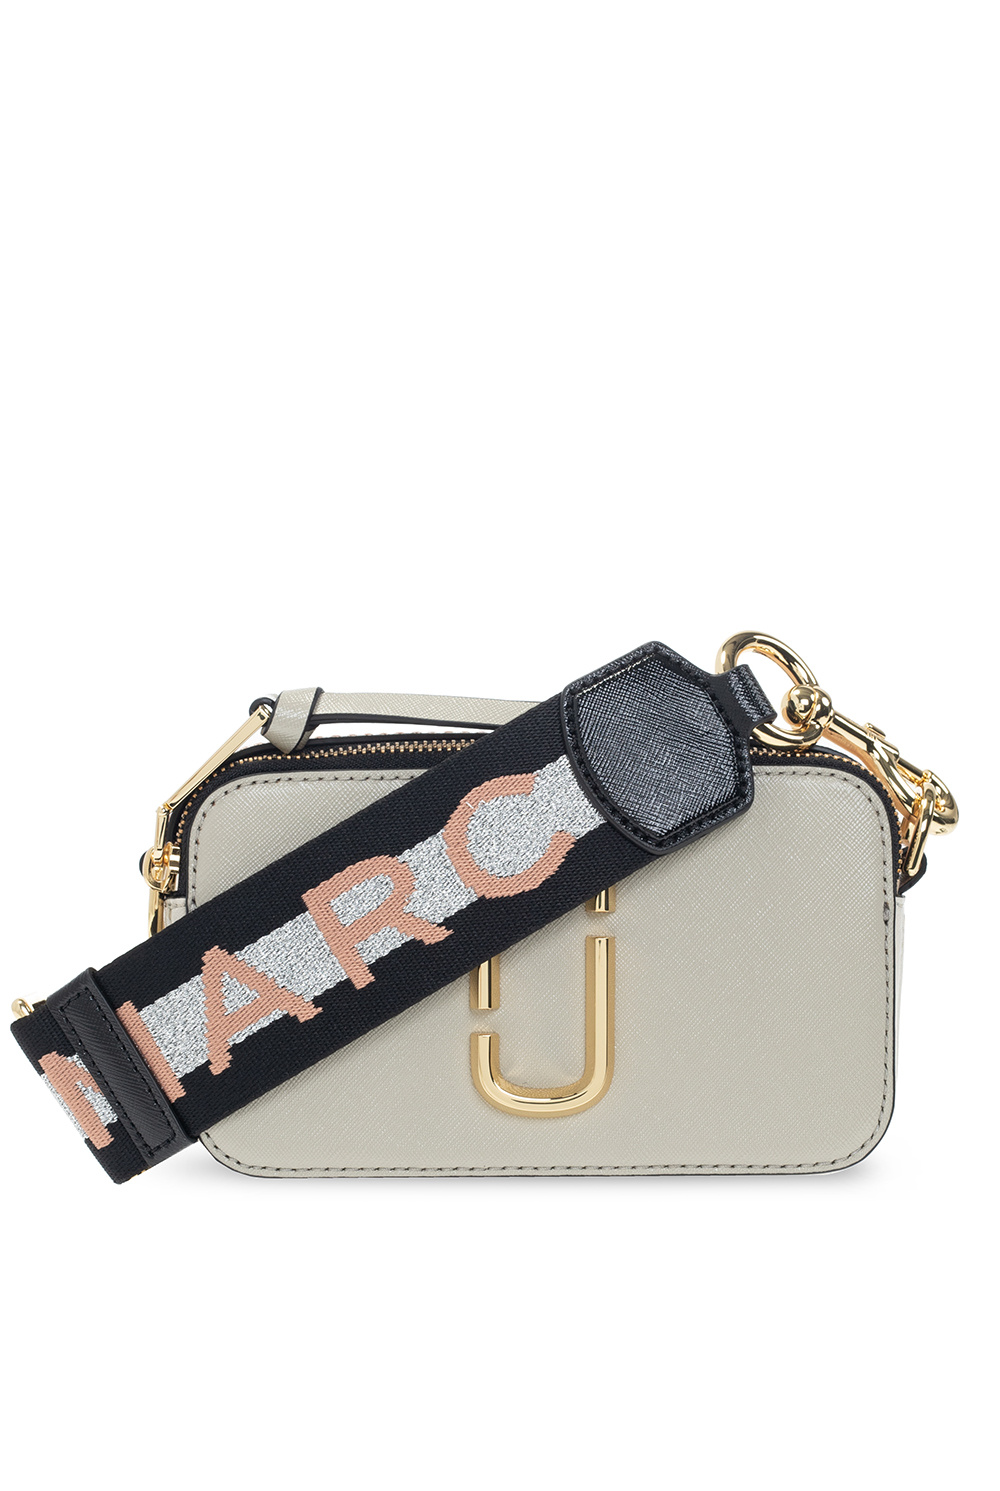 42 Out fit with marcjacobs's camera bag ideas  marc jacobs snapshot bag, marc  jacobs snapshot bag outfit, marc jacobs